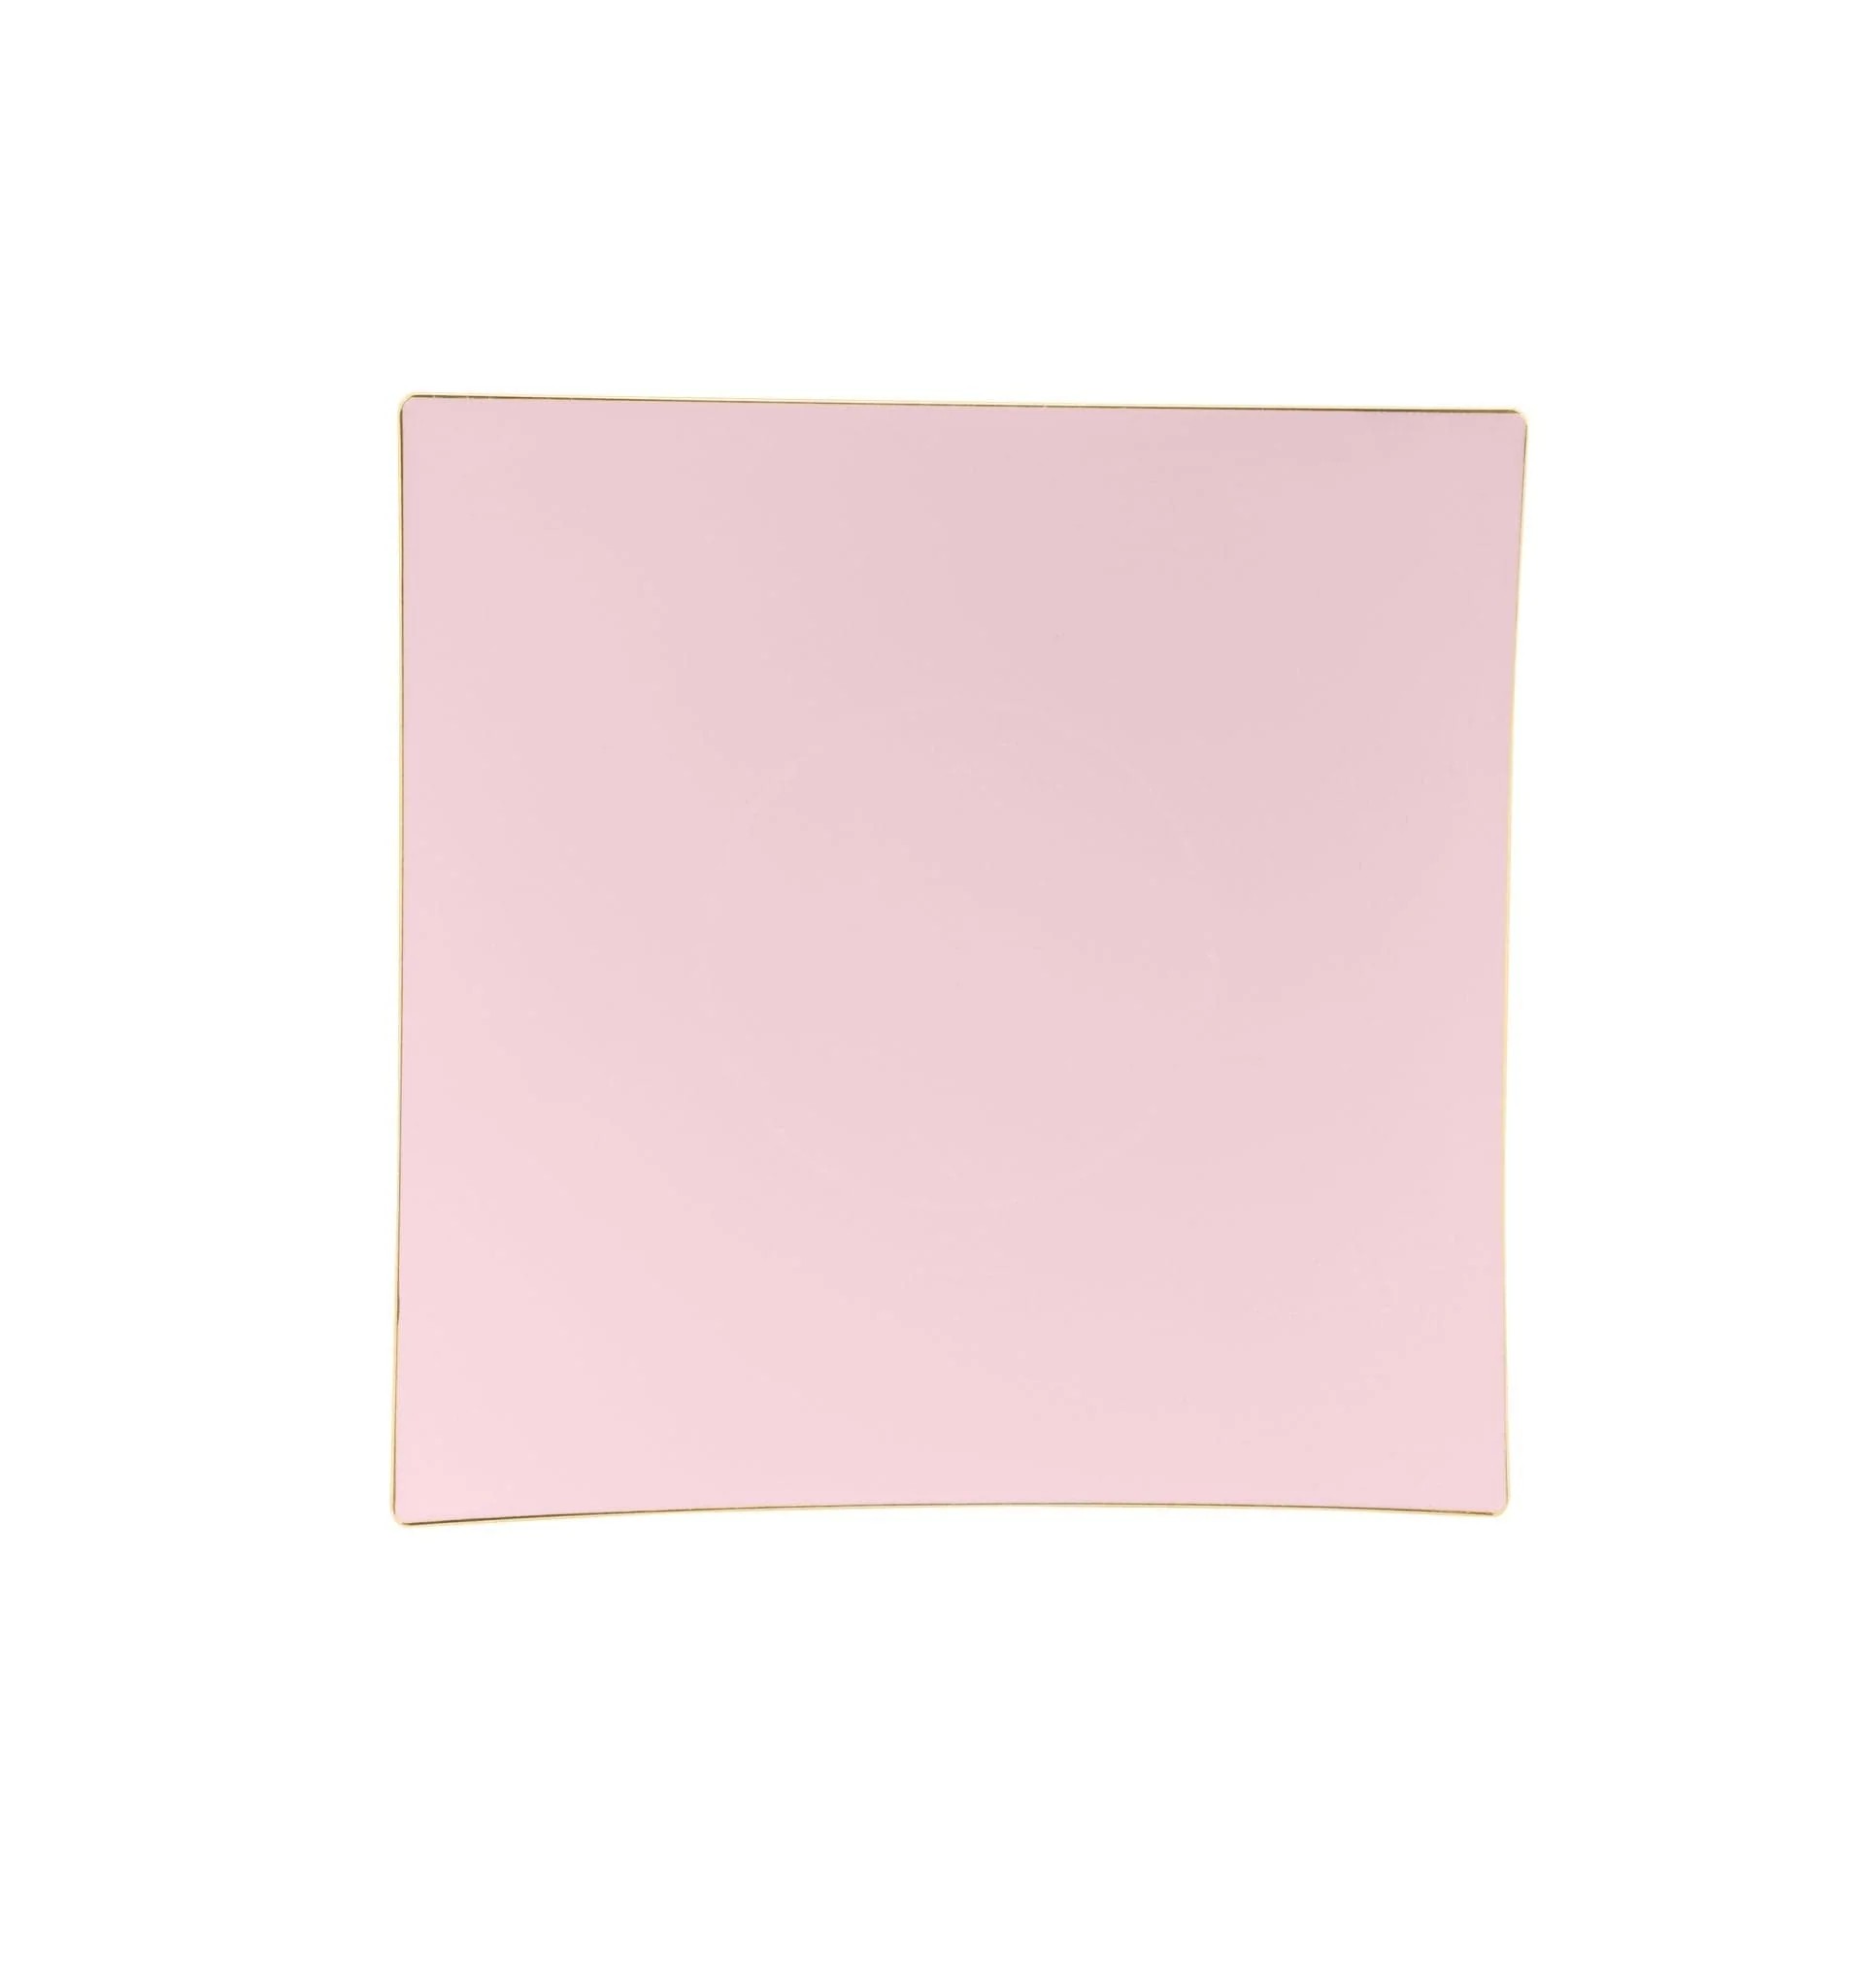 Luxe Party Square Blush with Gold Trim Plastic Appetizer Plate 8